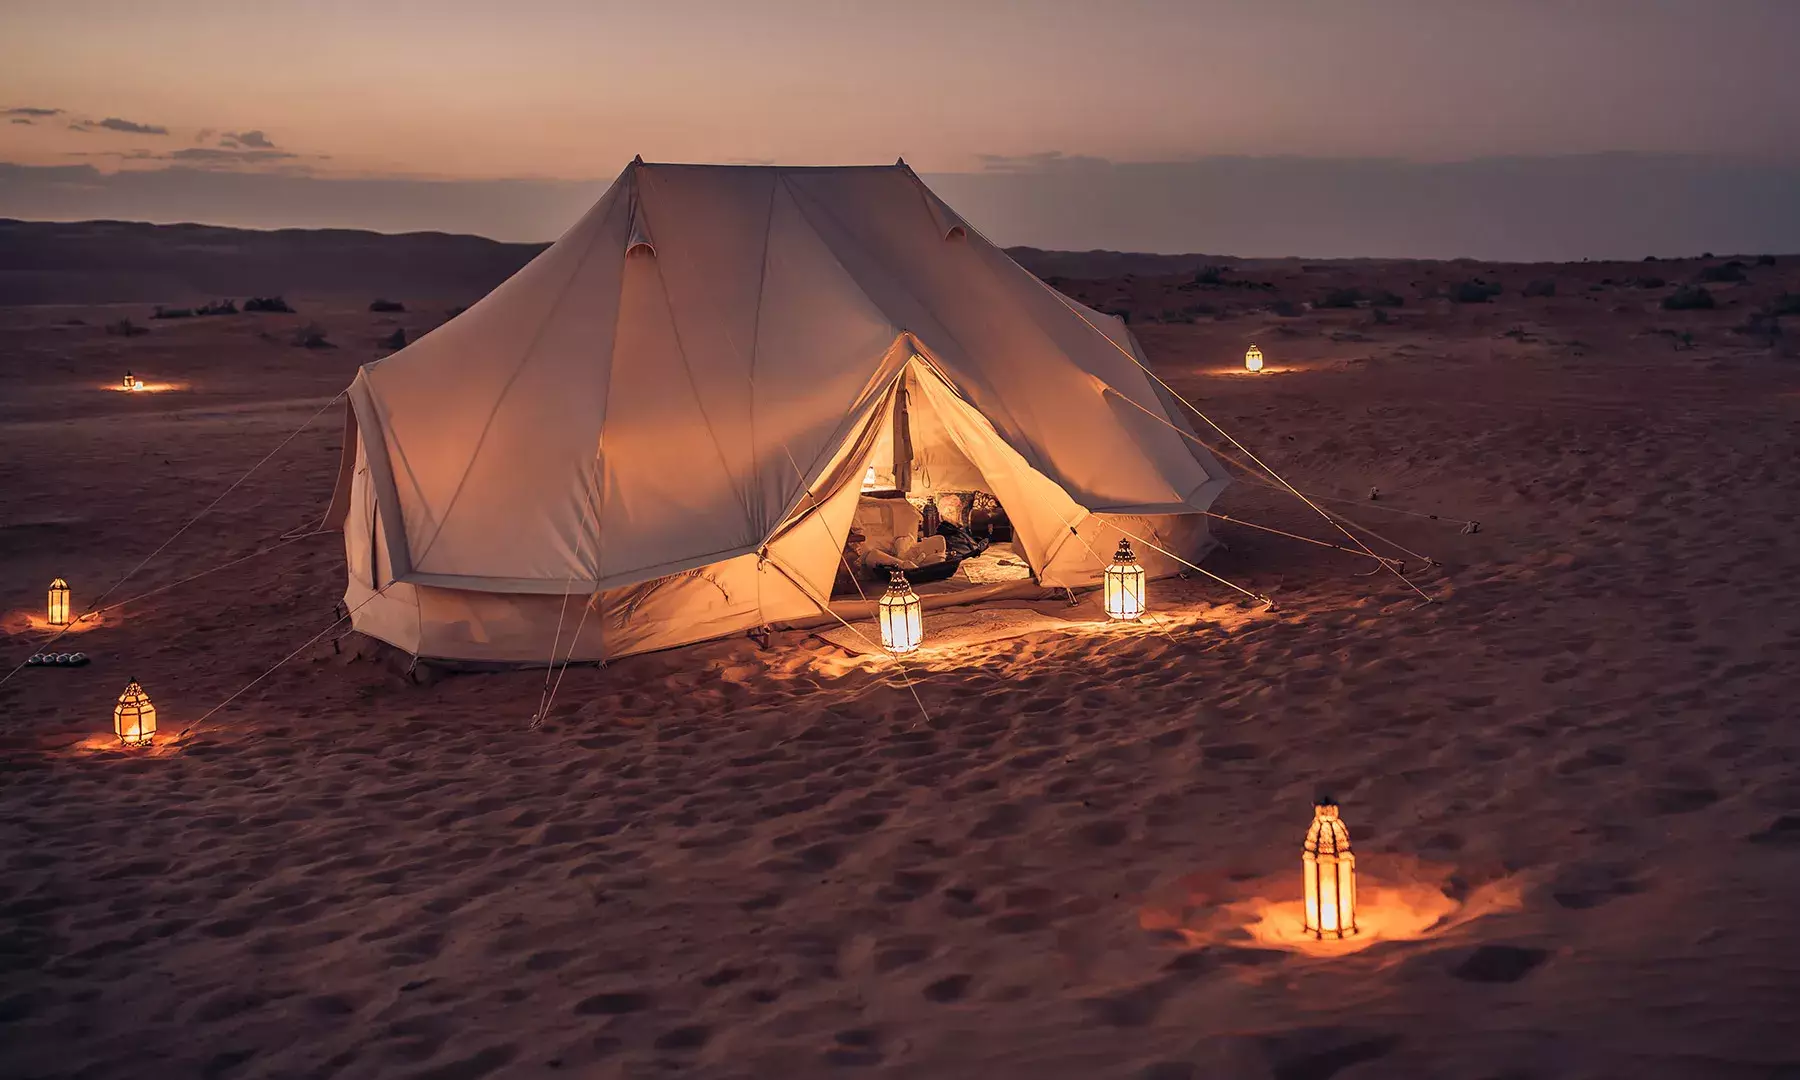 Wahiba Sands Private camp